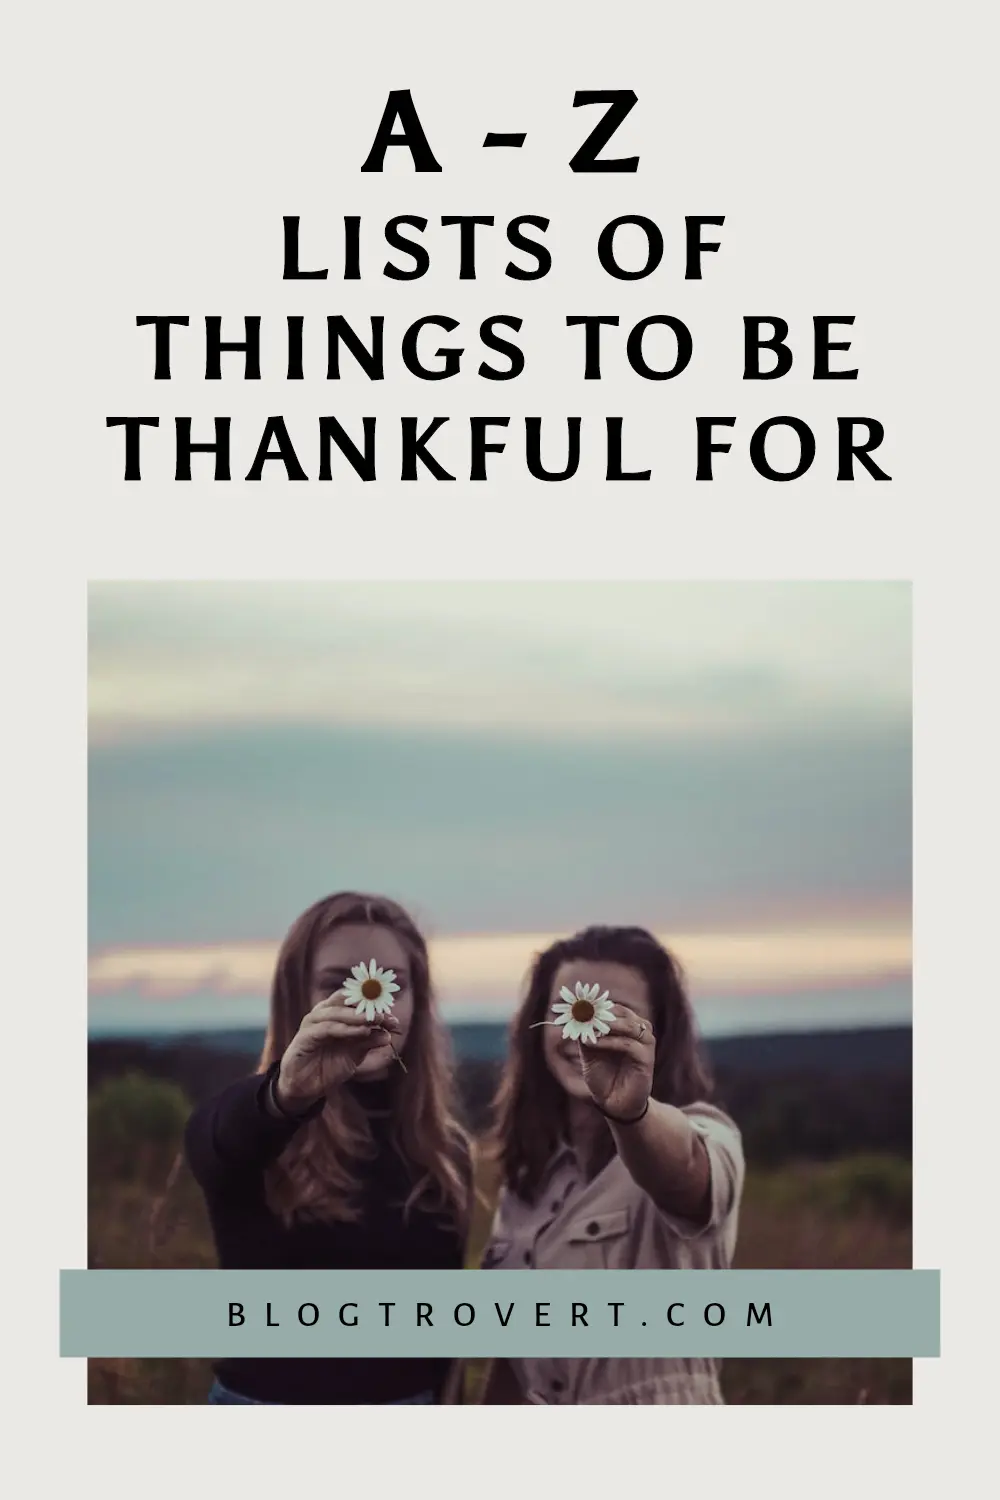 A-Z Unique Gratitude List Ideas - 100 things to be thankful for everyday 9